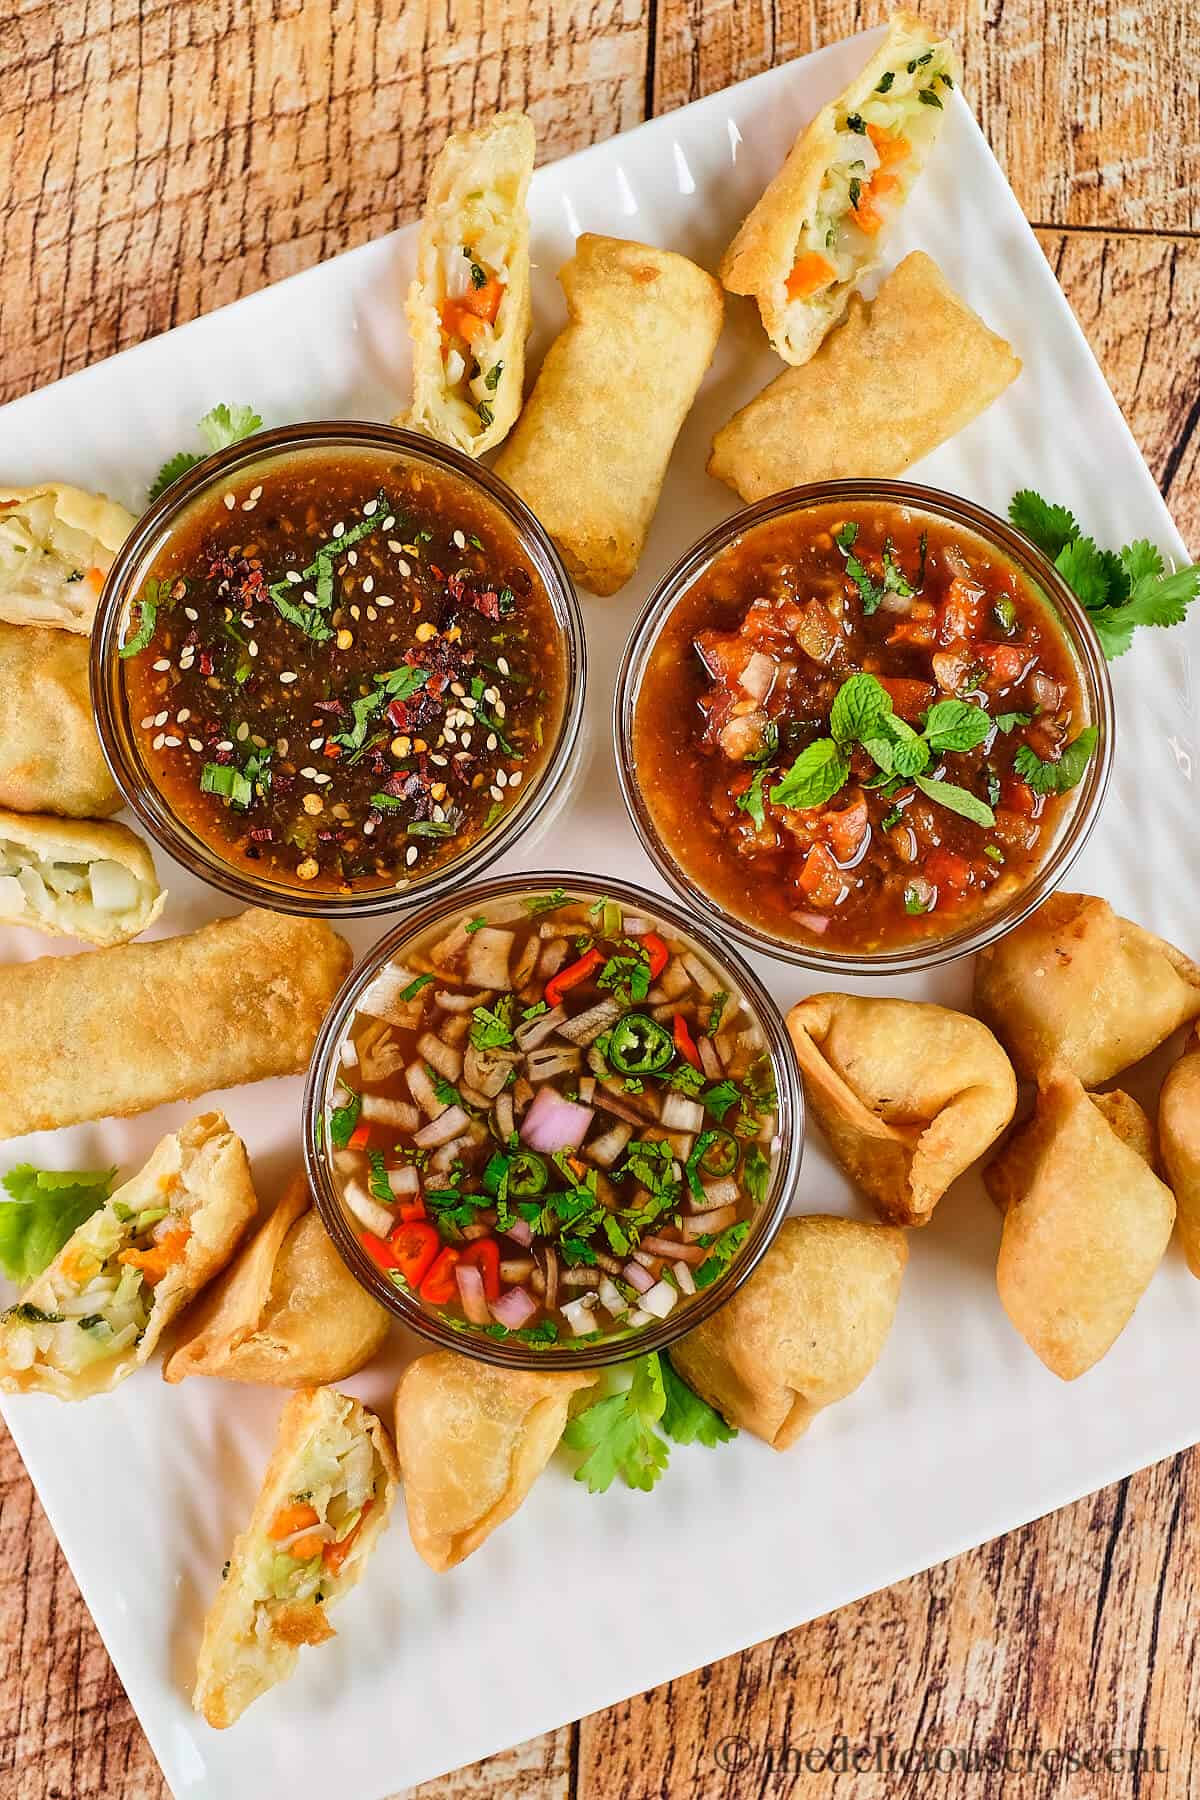 Tamarind Dipping Sauces - The Delicious Crescent